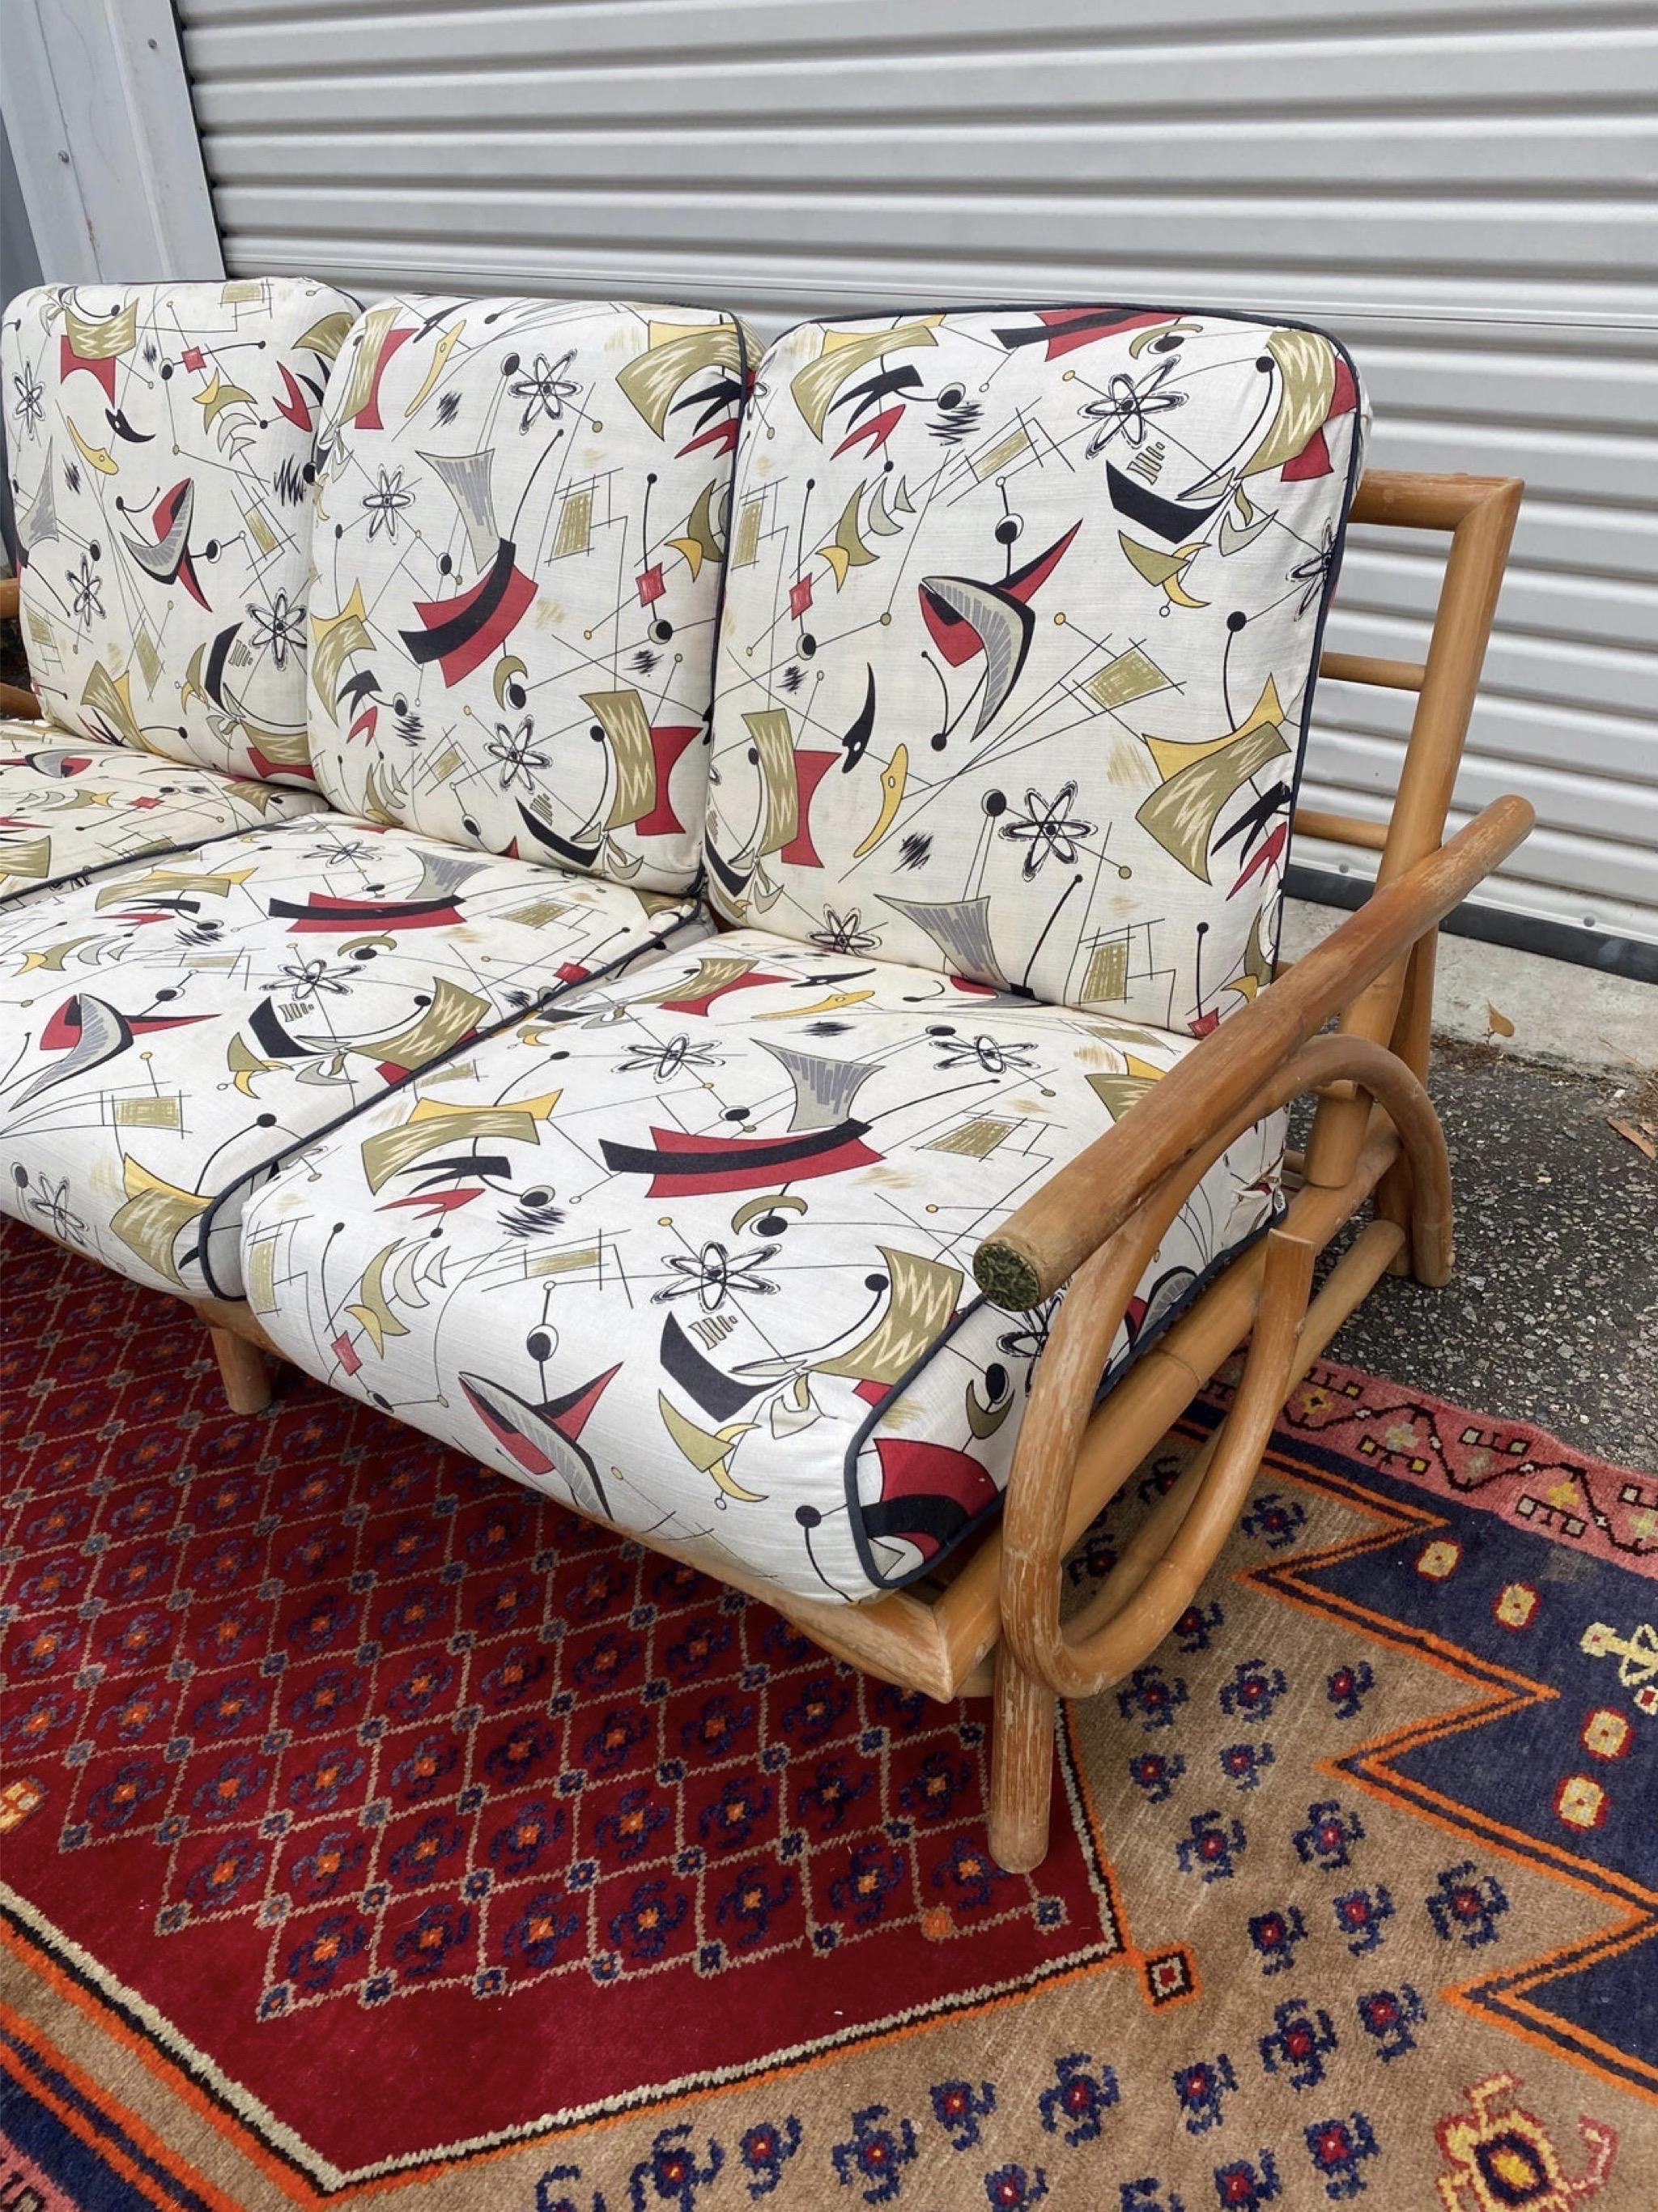 This stunning French bamboo sofa is so so comfortable!   New cushions slip covers have been redone in new old stock atomic barkcloth.   The arms have metal caps on the ends and the lines on the sofa are just wonderful with their swirls.  